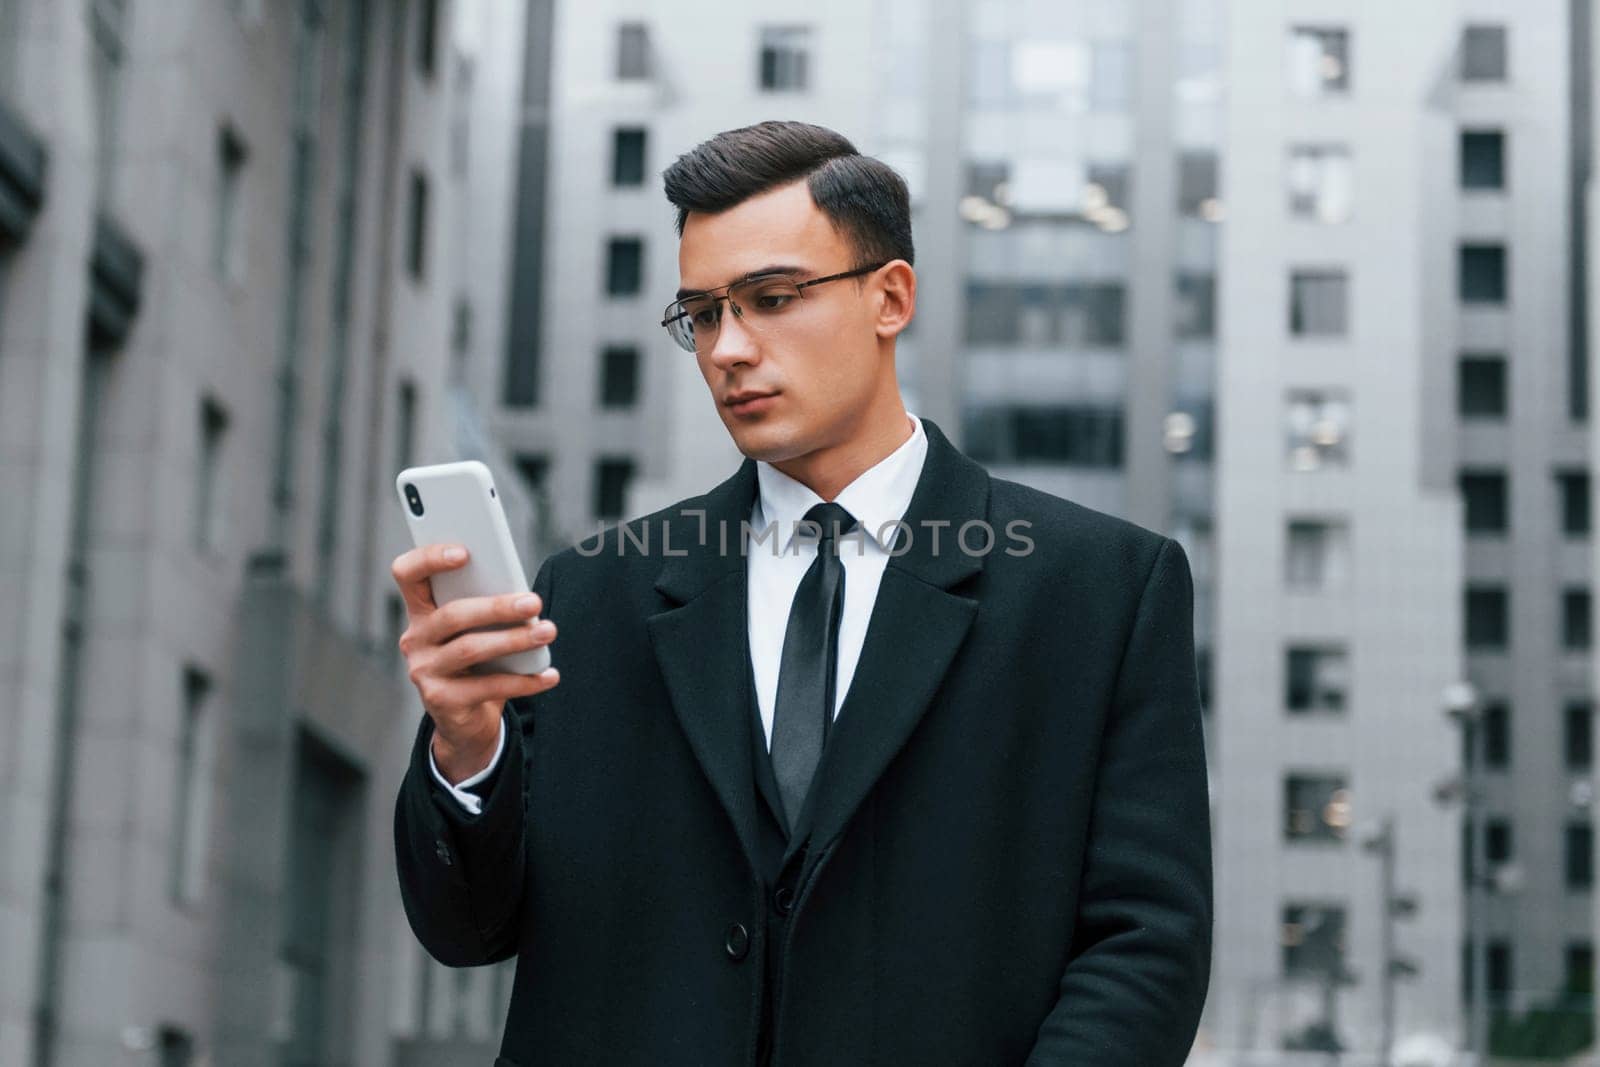 Phone in hand. Businessman in black suit and tie is outdoors in the city.